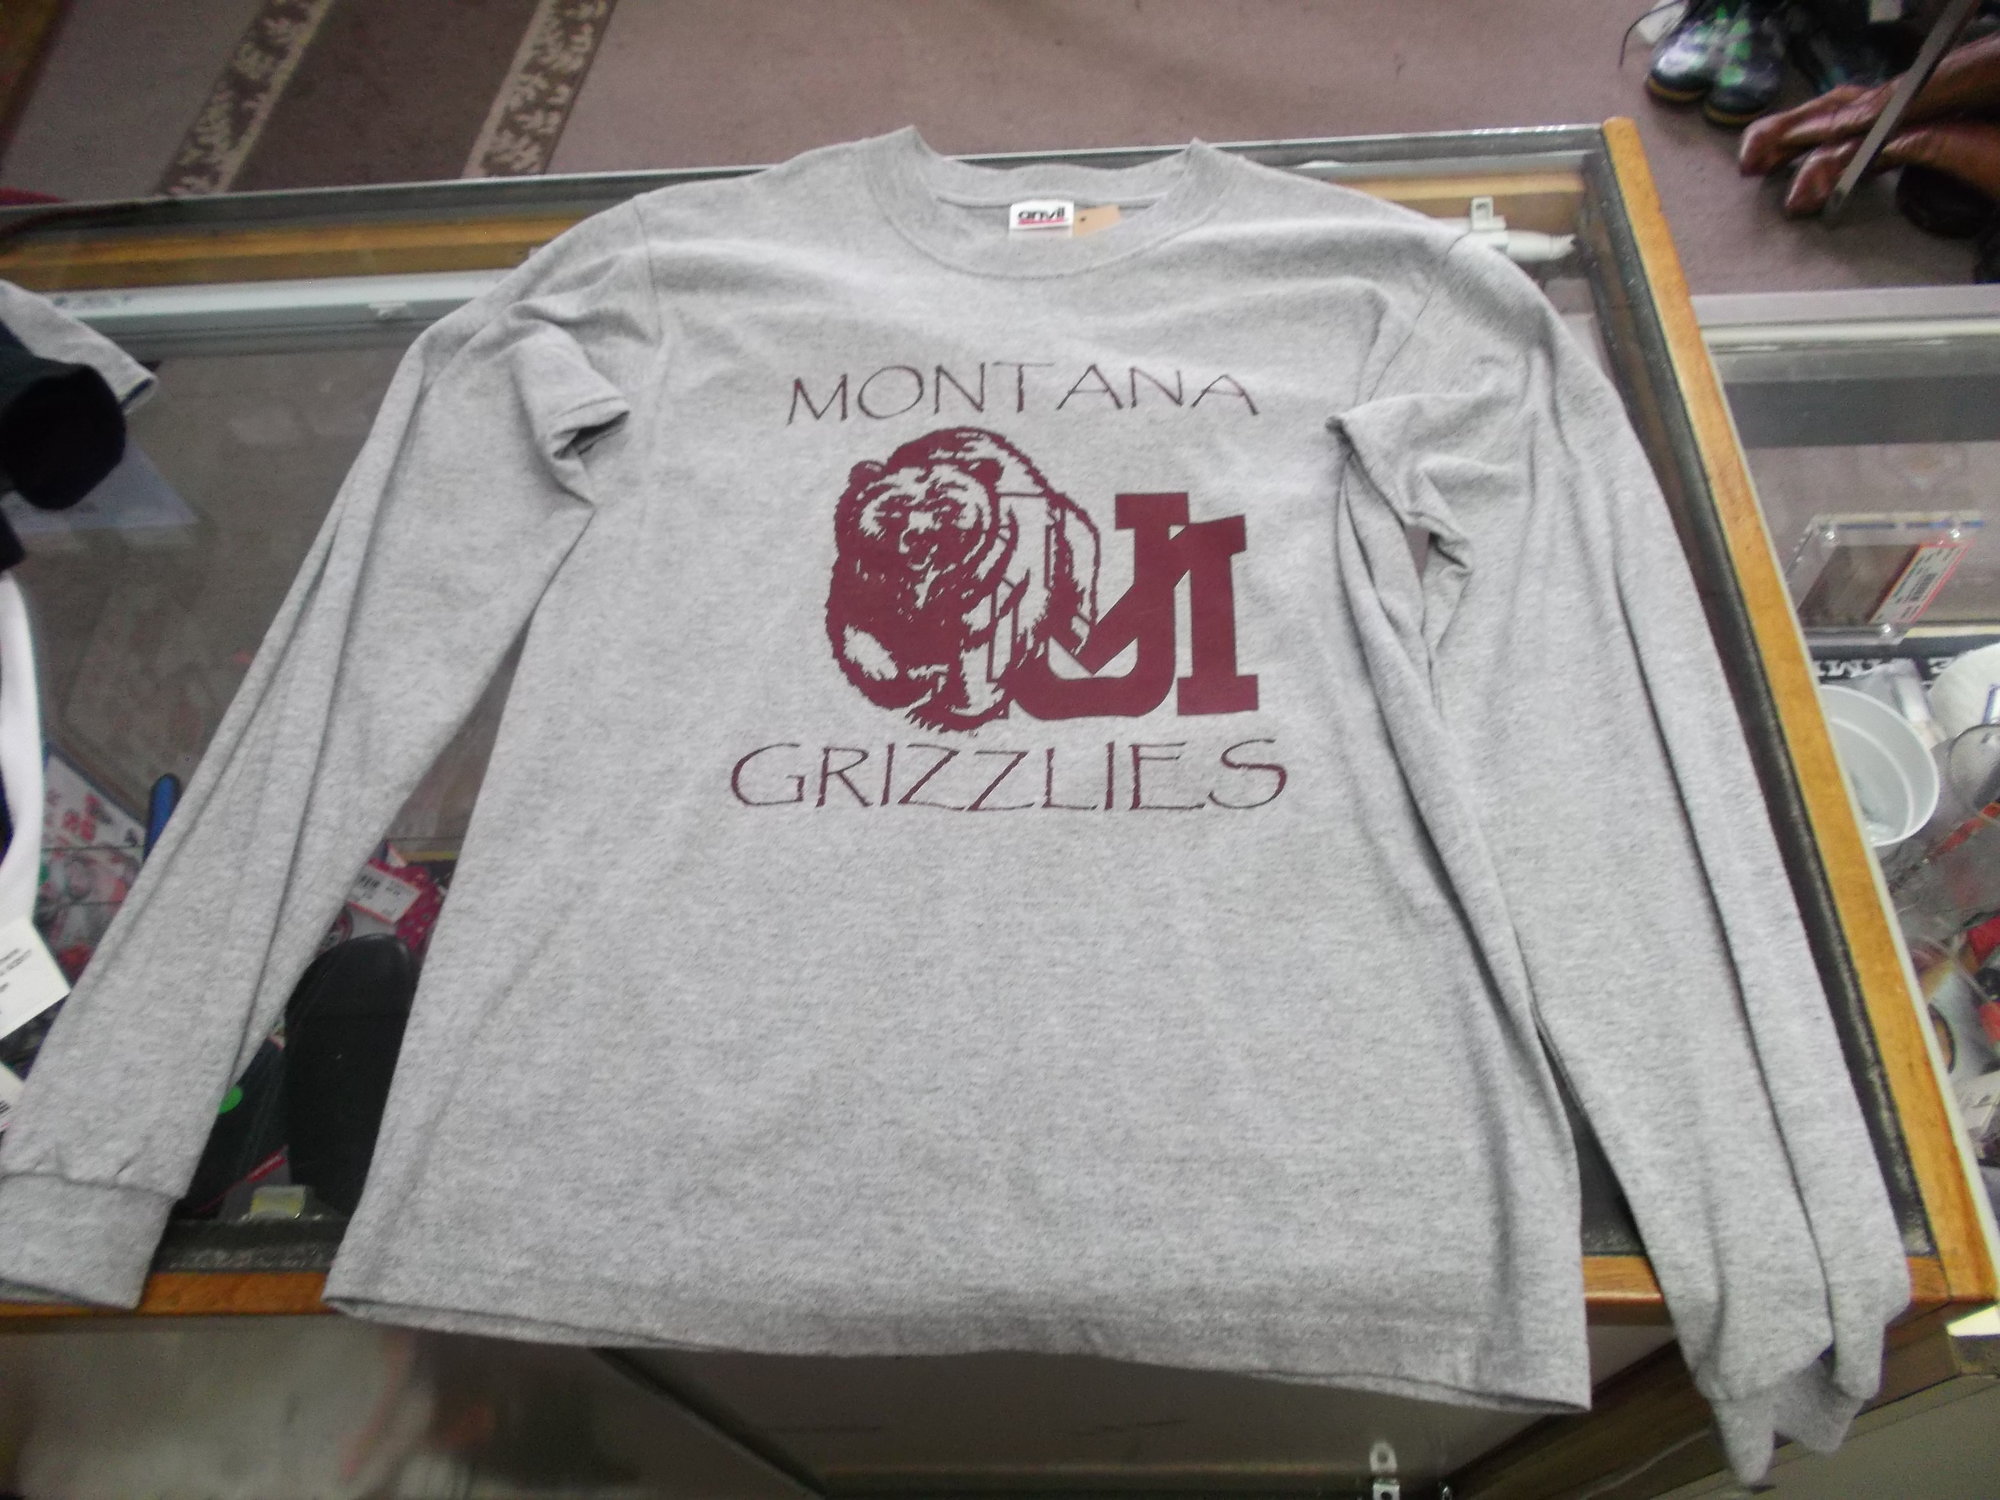 Montana Grizzlies YOUTH Anvil Long Sleeve Shirt Size Large Gray #8267
Rating:   (see below) 3 - Good Condition
Team: Montana Grizzlies
Player: N/A
Brand: Anvil
Size: Large - YOUTH(Measured Flat: Across chest 17\"; length 25\") 
Color: Gray
Style: Long sleeve screen pressed shirt
Material: 90% Cotton 10% Polyester
Condition: - Good Condition - wrinkled; Pilling and fuzz is present; Material feels coarse; Front part of the left side of the collar is stained; Definite signs of use; Logo looks great; No rips or holes(See Photos for condition and description)
Shipping: $3.37
Item #: 8267 